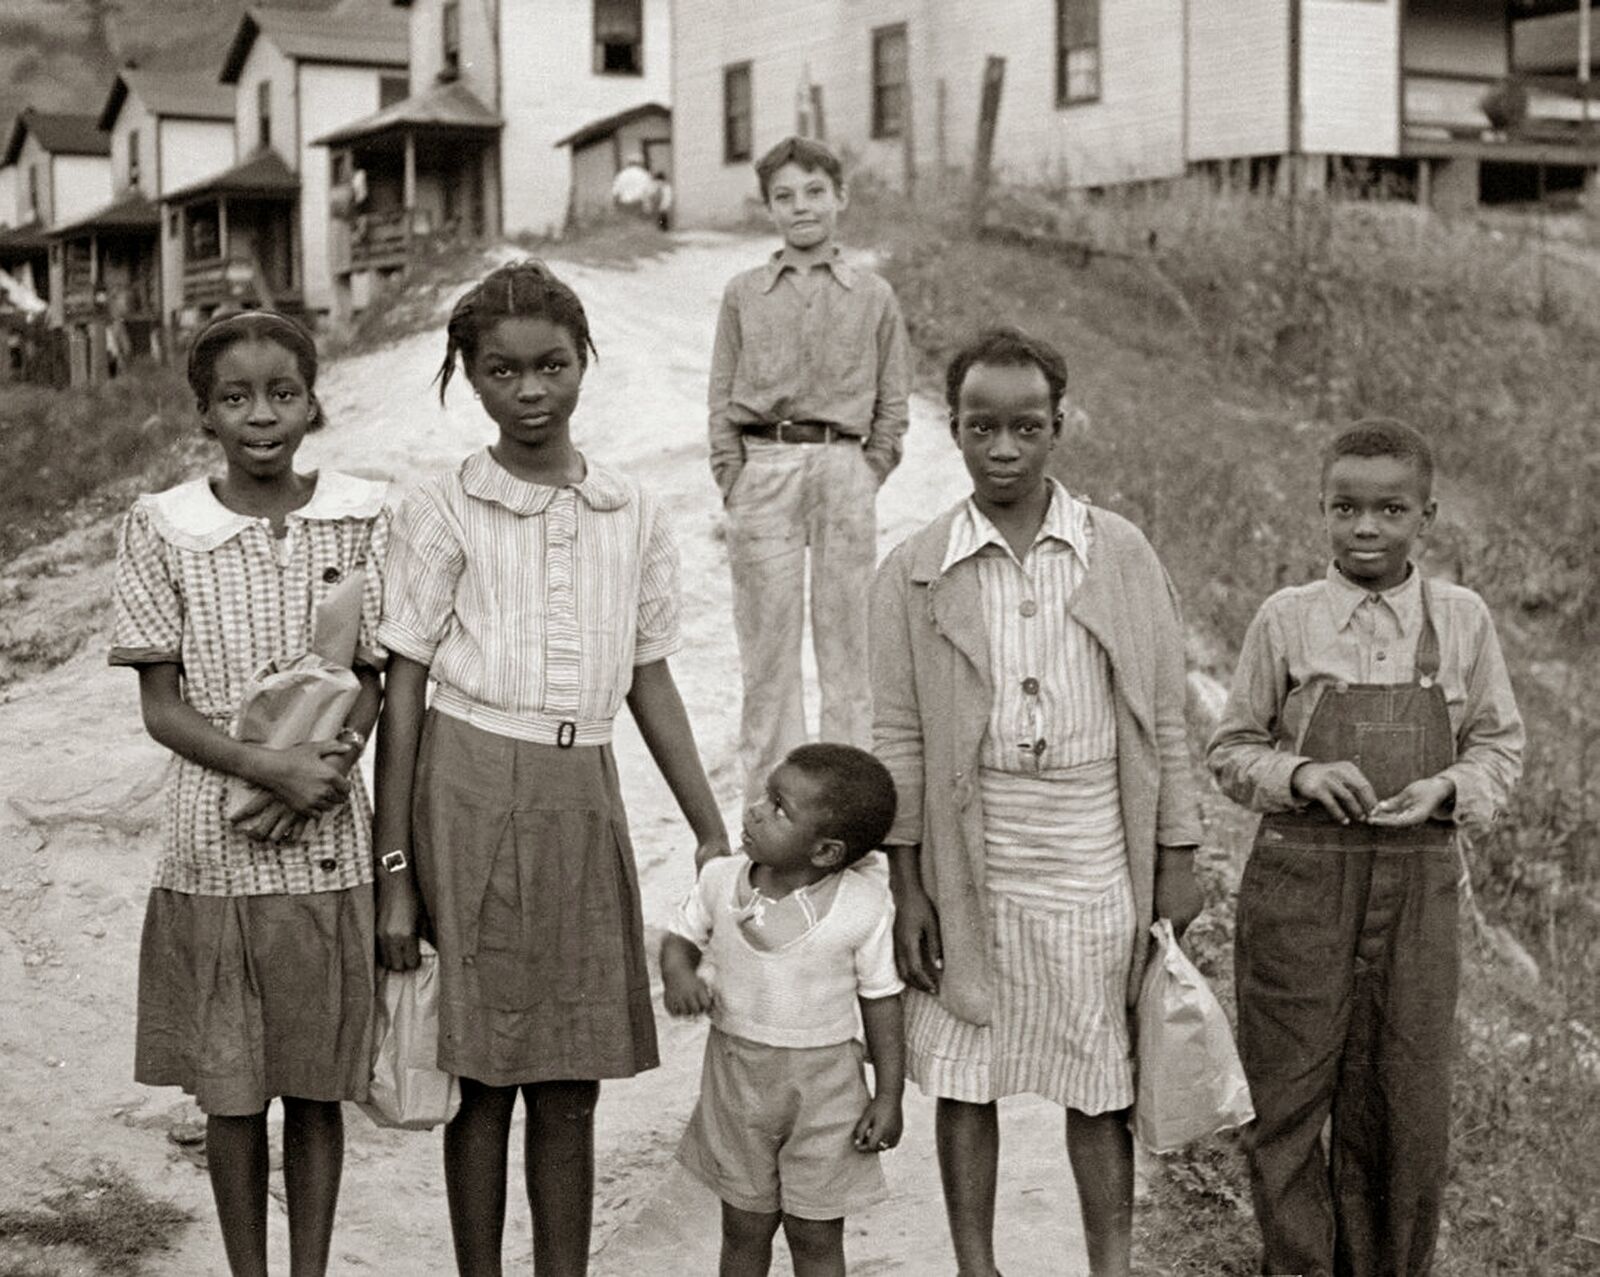 1935 AFRICAN AMERICAN FAMILY in W. VIRGINIA Photo  (230-T)